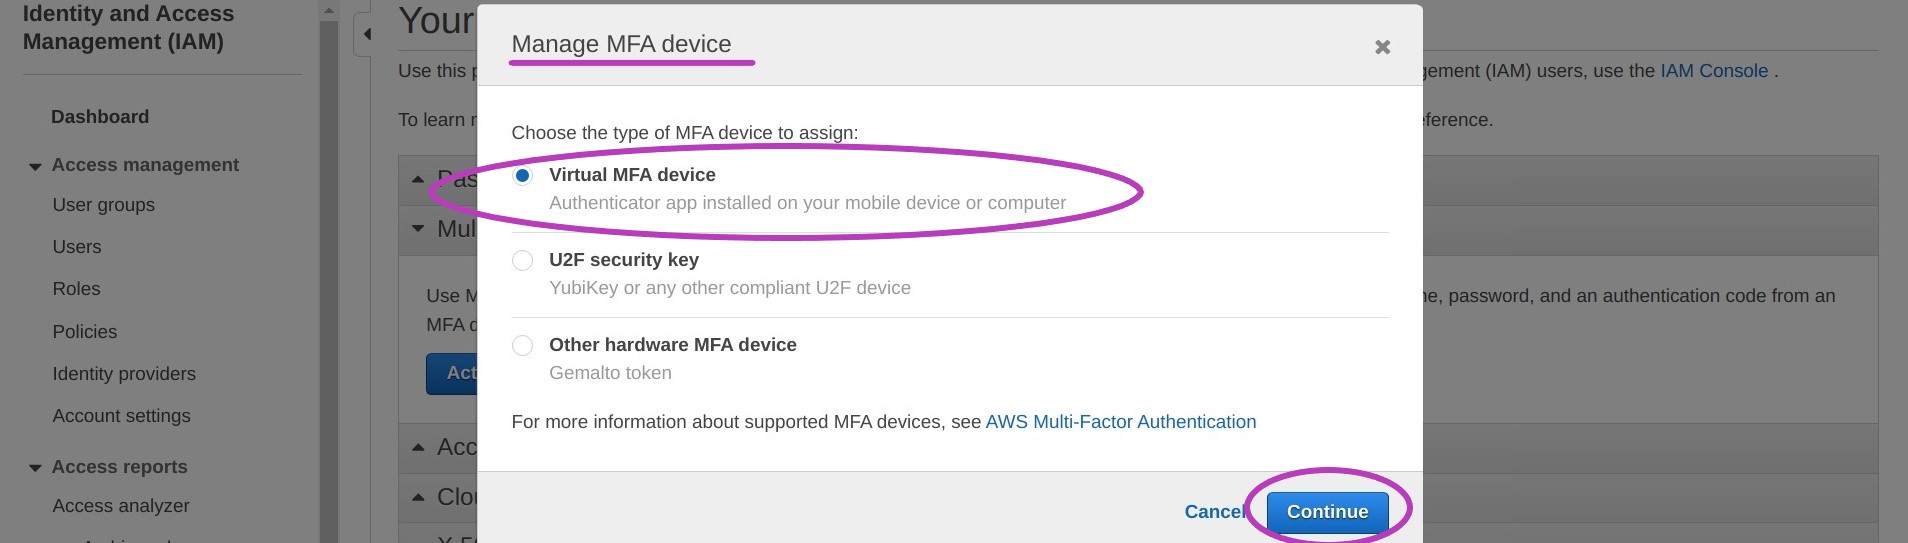 Screen shot of AWS Console Manage MFA device pop-up window in a browser with option Virtual MFA device selected and circled